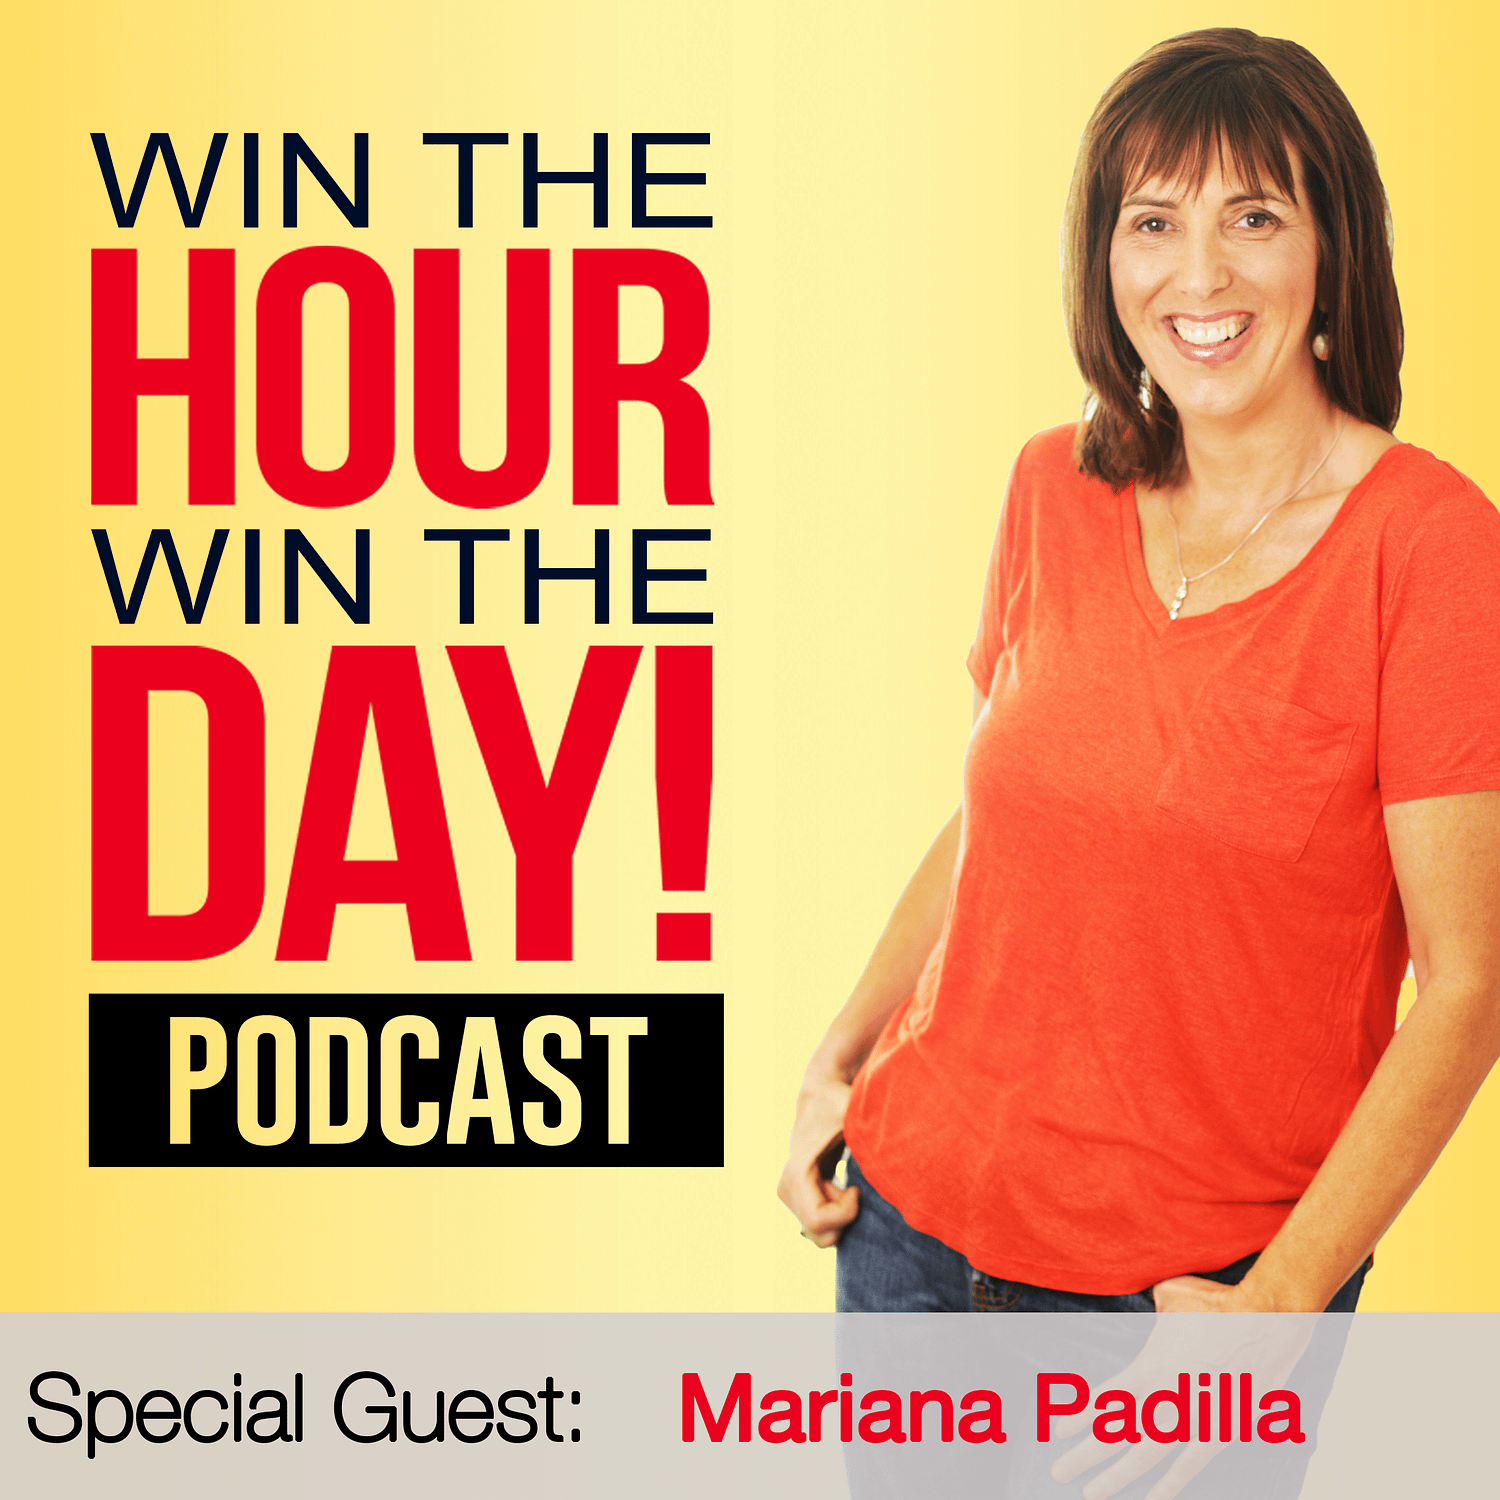 How To Make Social Media Easy And Avoid The Overwhelm! with Mariana Padilla